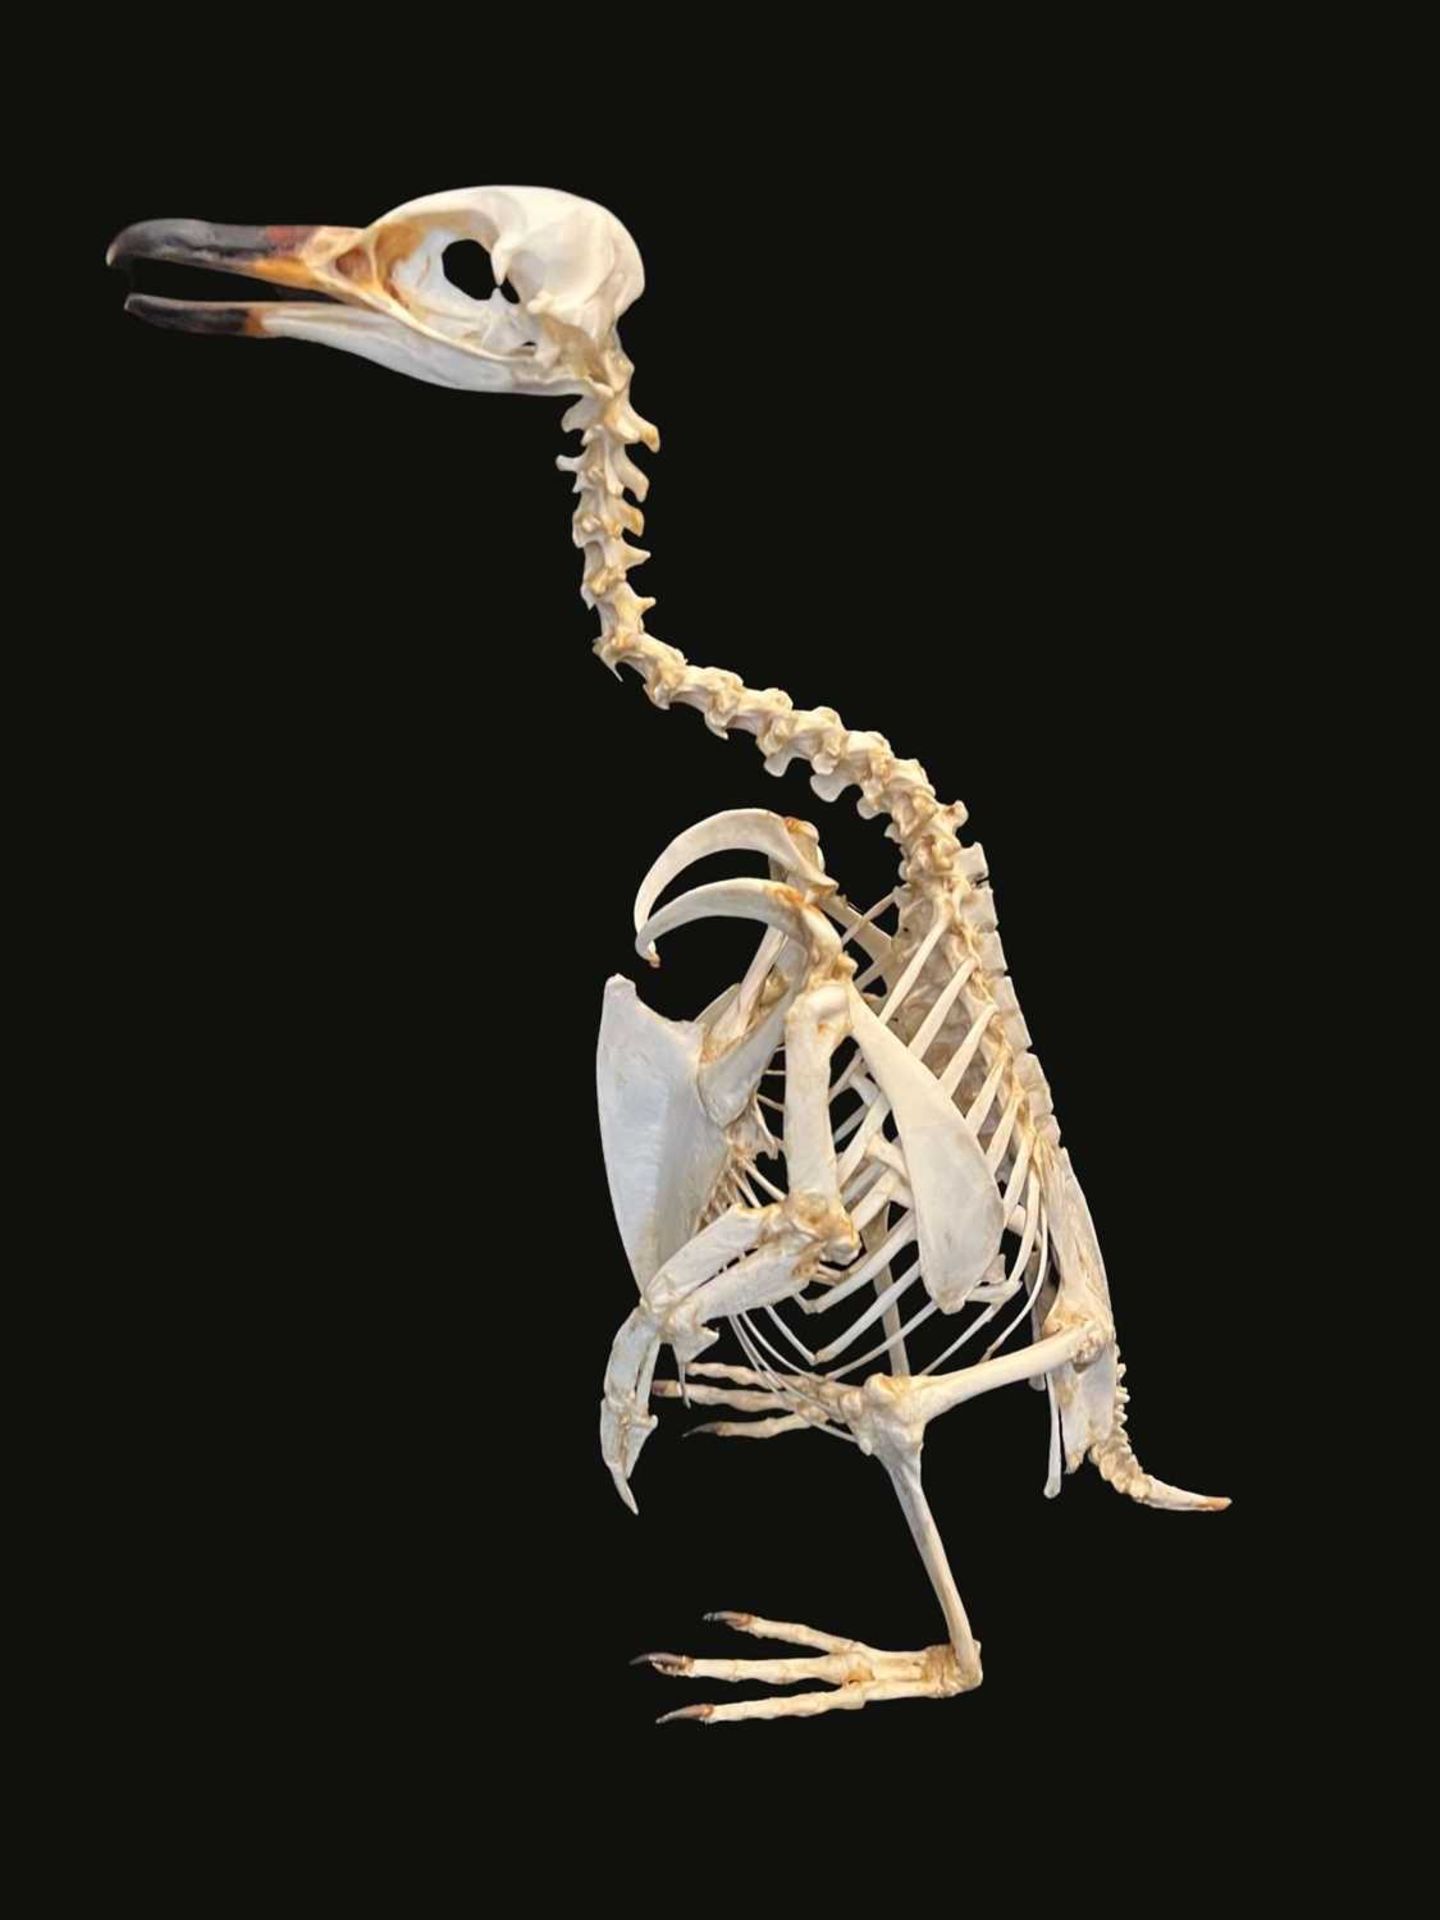 A TAXIDERMY / OSTEOLOGY PENGUIN SKELETON.